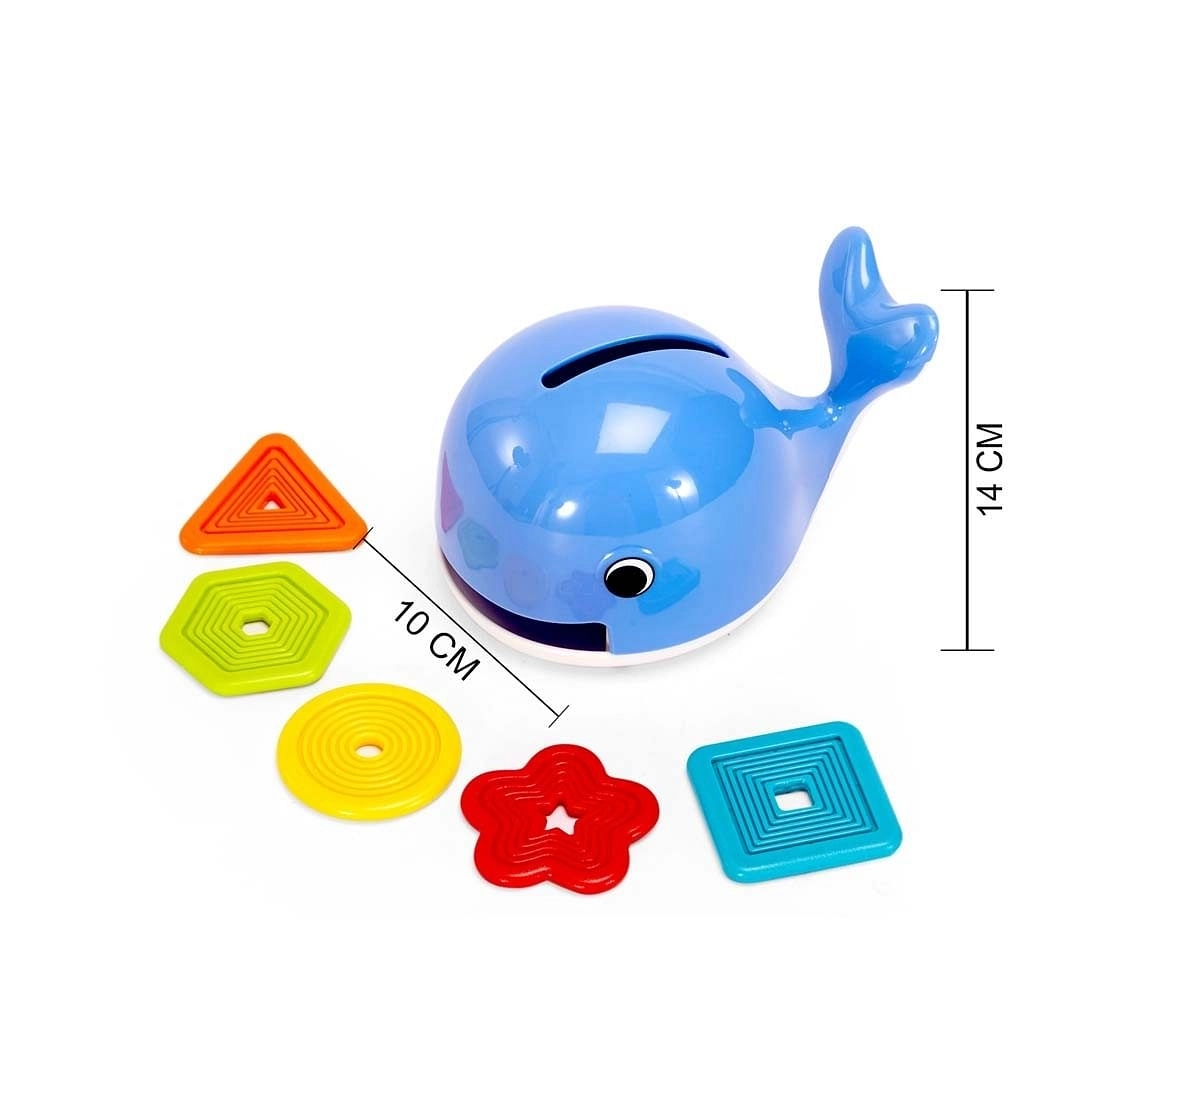  K'S Kids Feed The Whale Activity Toys for Kids age 12M+ 